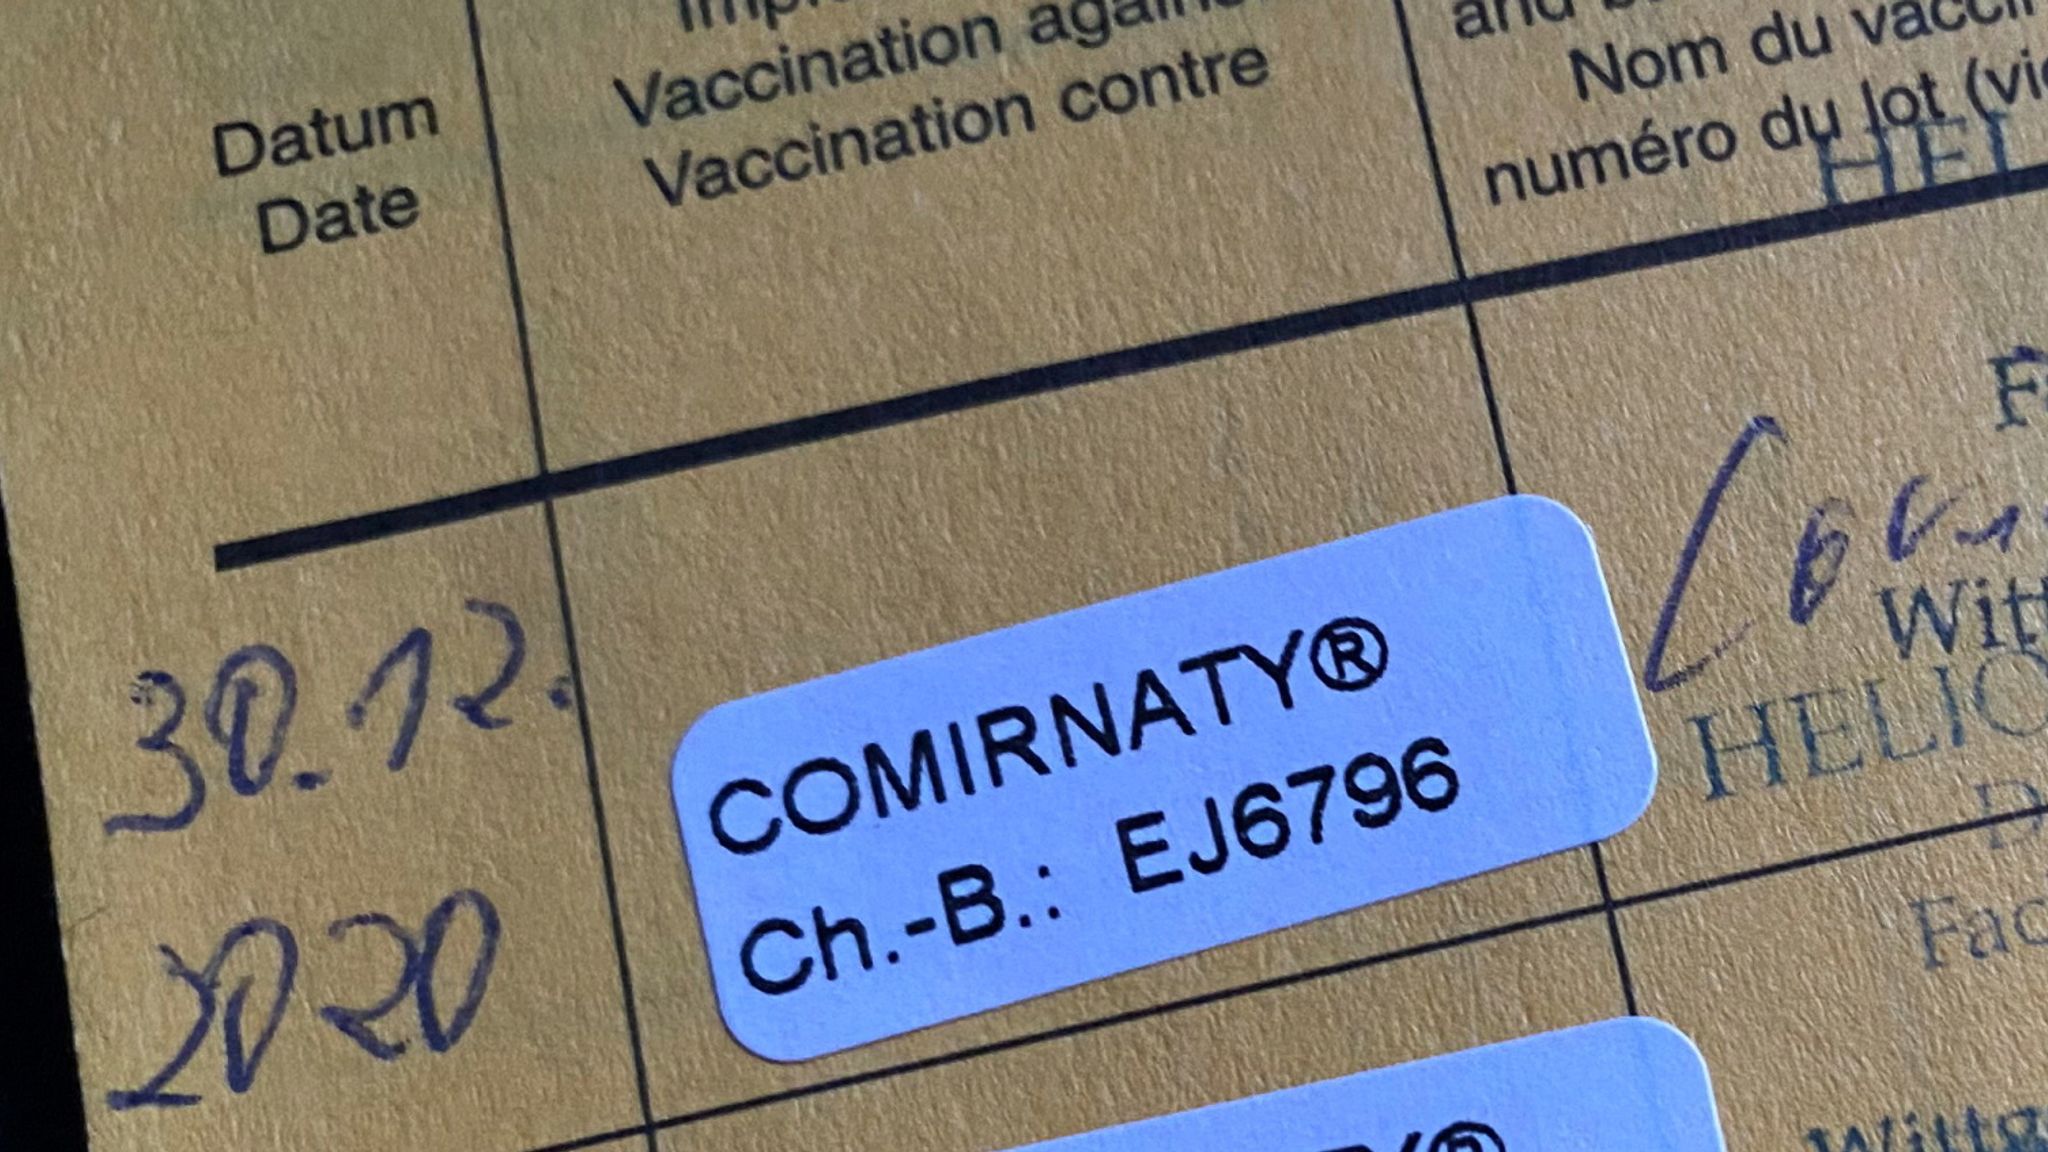 Nigeria missing from UK’s list of recognised Covid-19 vaccine certificates